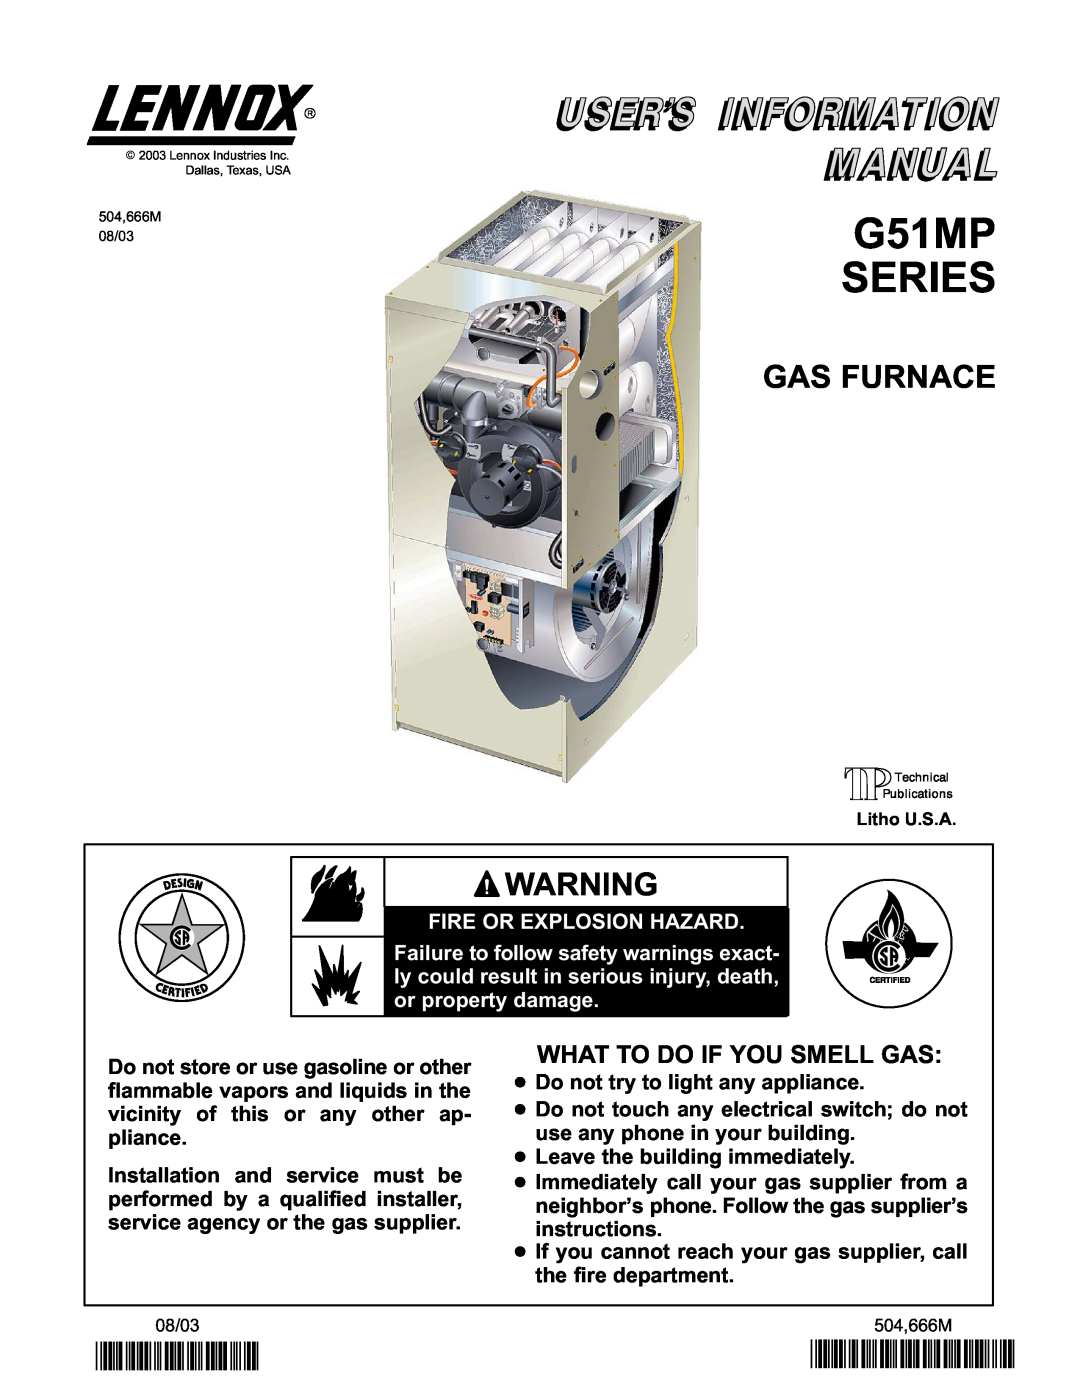 Lenoxx Electronics P504666M manual G51MP SERIES, Gas Furnace, 2P0803, What To Do If You Smell Gas 